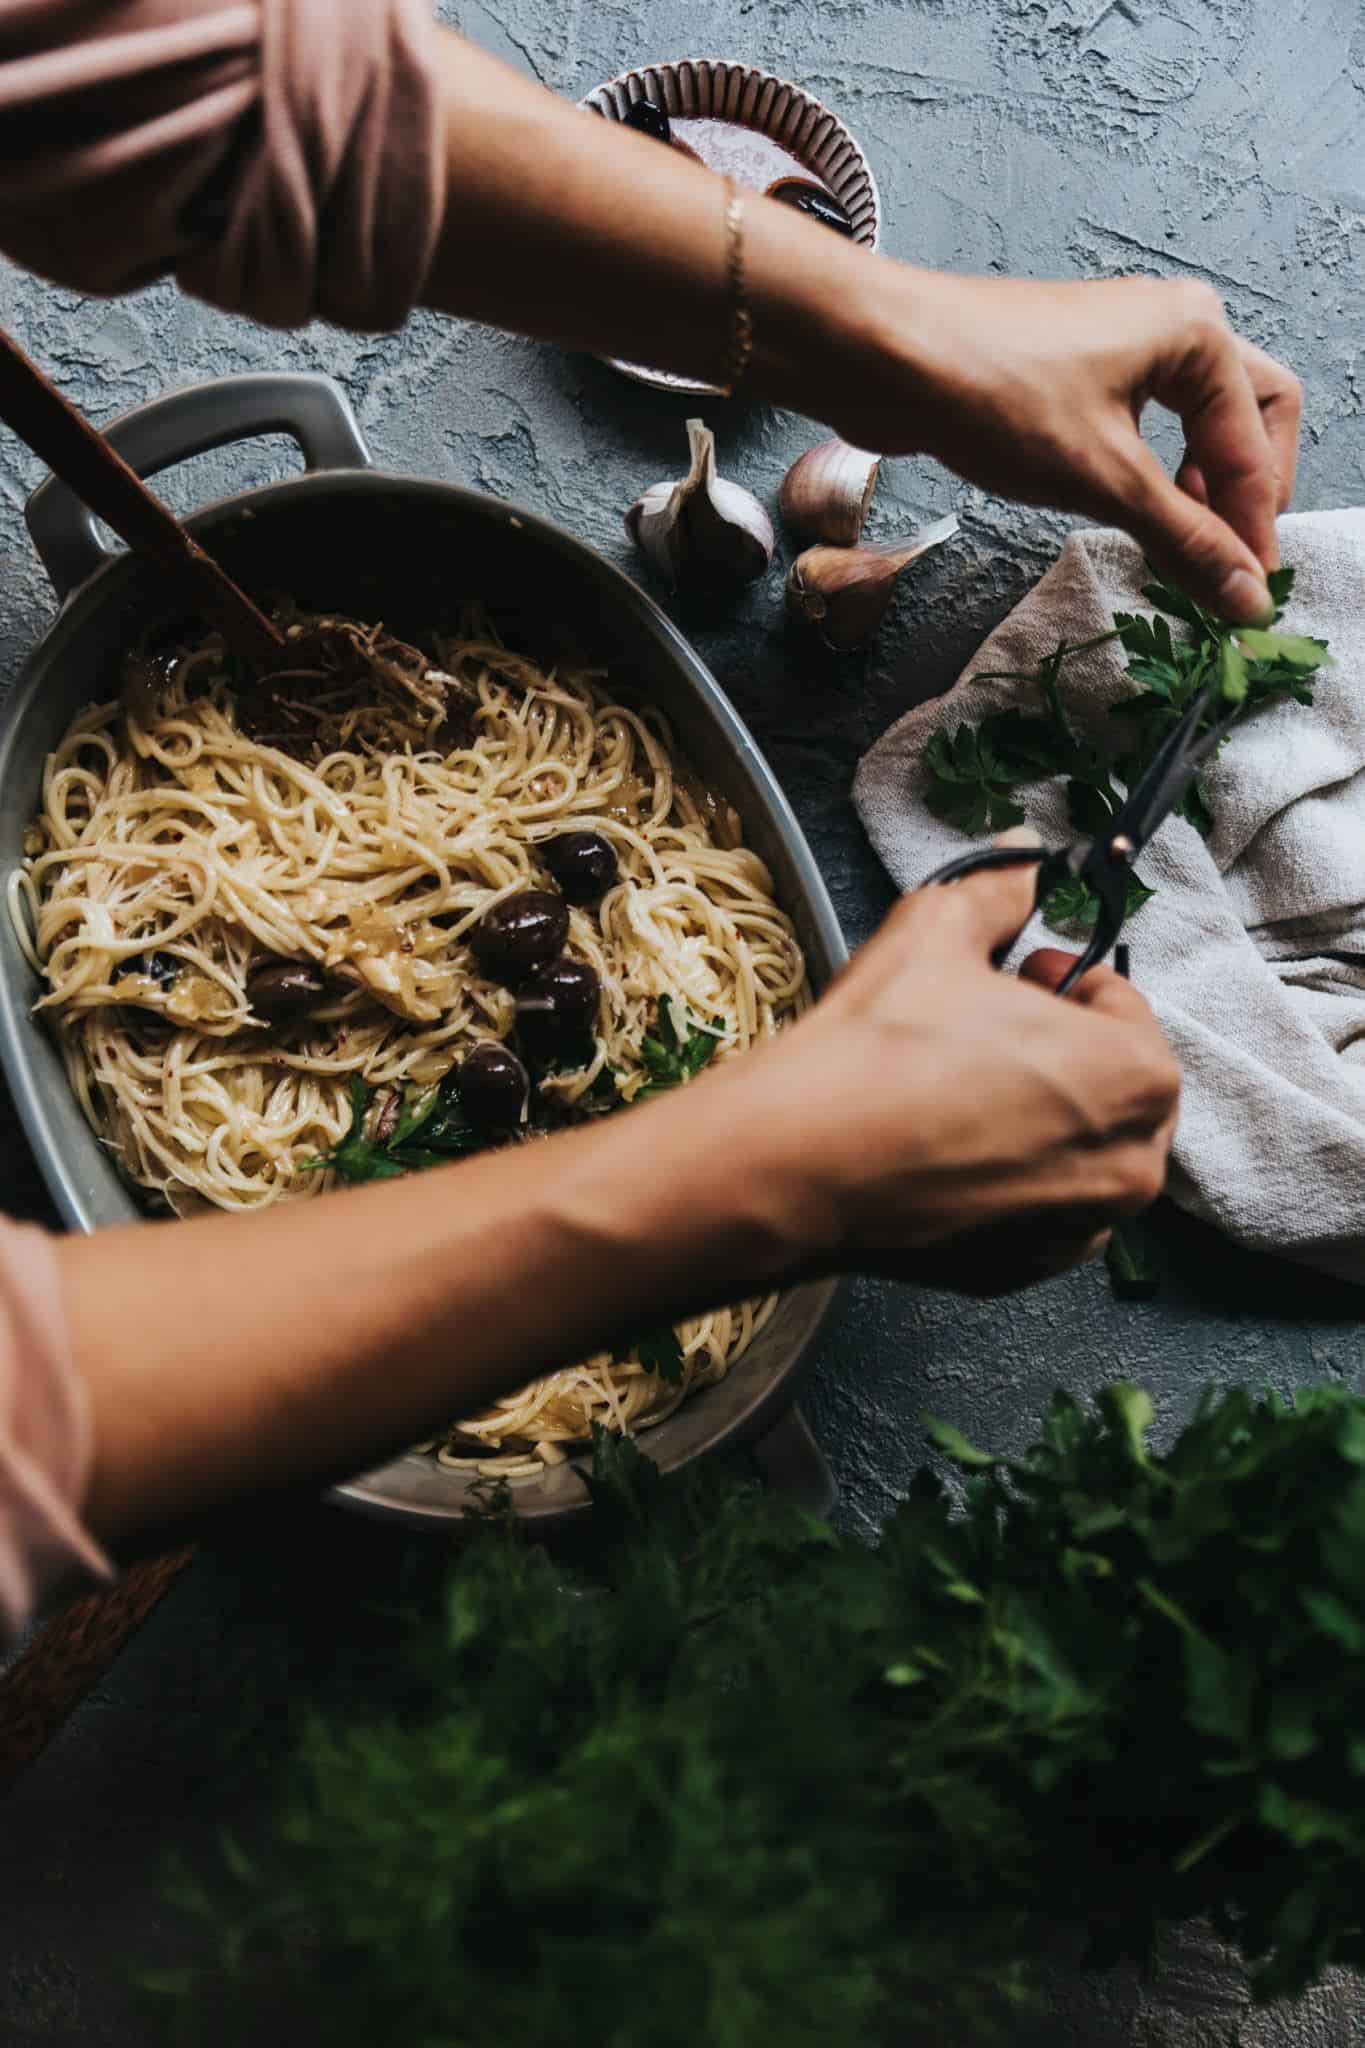 Creamy Vegan Pasta in a large serving dish with arms reaching over to cut fresh herbs for garnish.